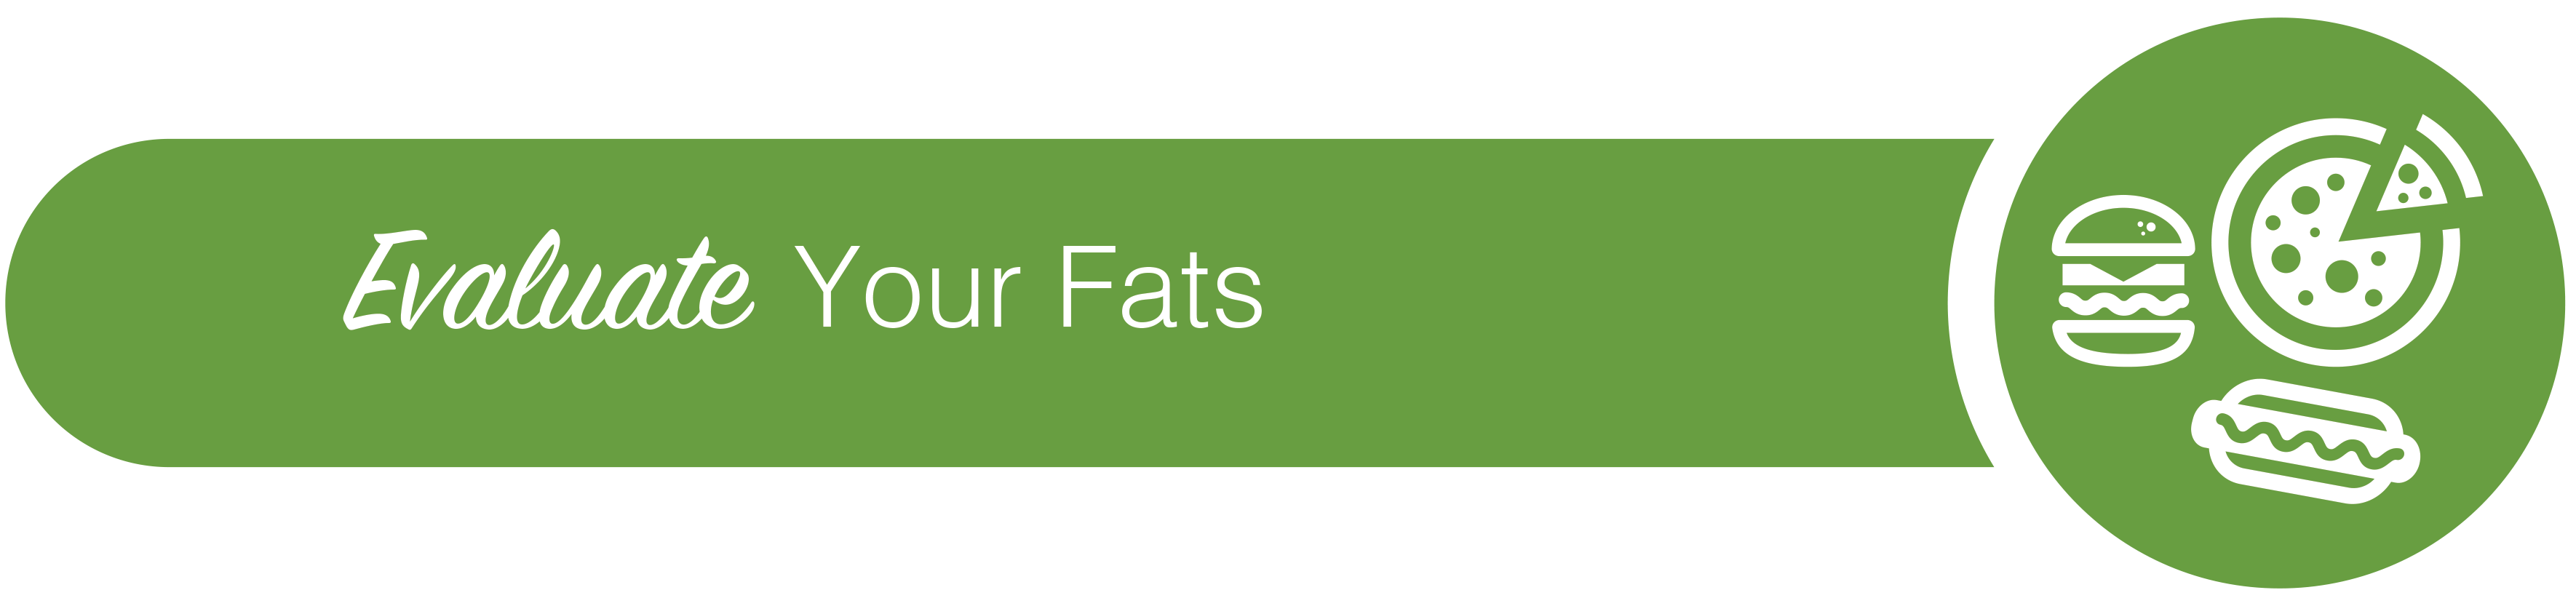 1119-KitchenClean-Up-Blog-Fats